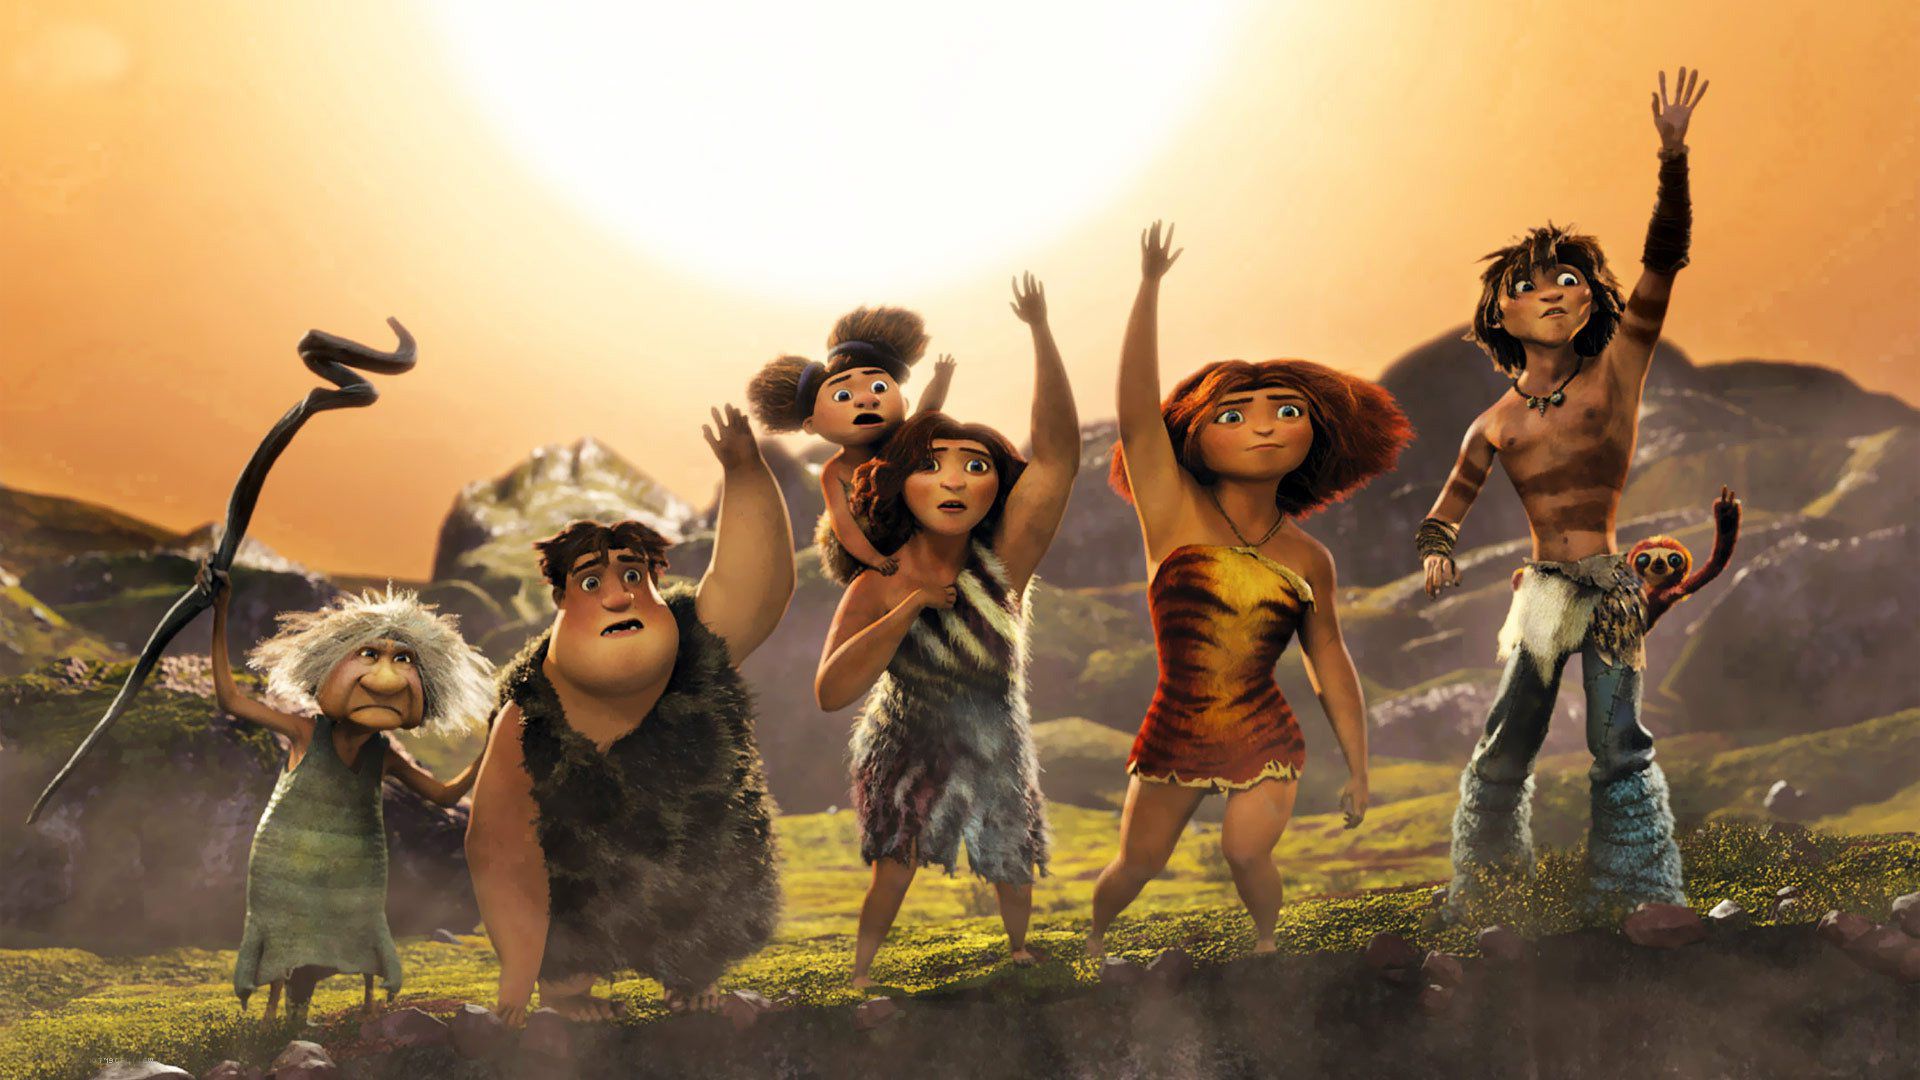 The Croods HD Wallpaper 61684 1920x1080px